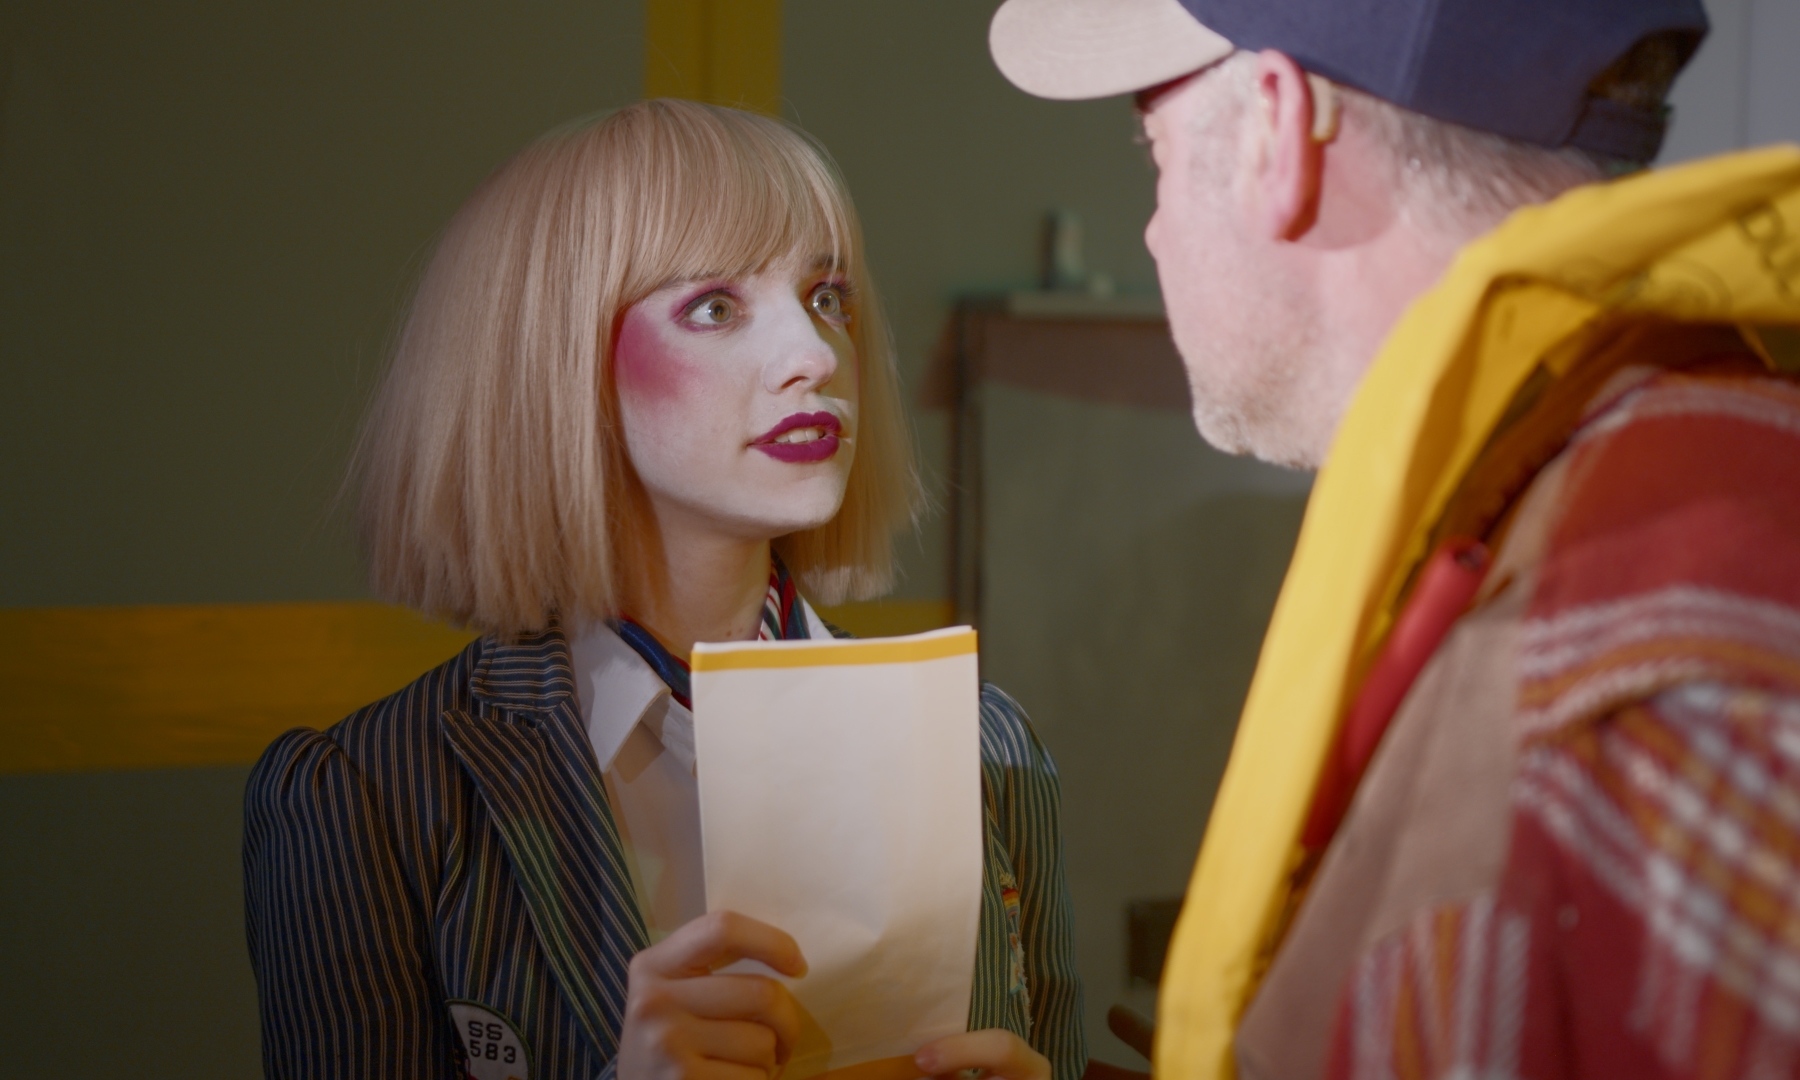 Still from Mothball, my thesis film featuring two characters in conversation. Role: Director of Photography